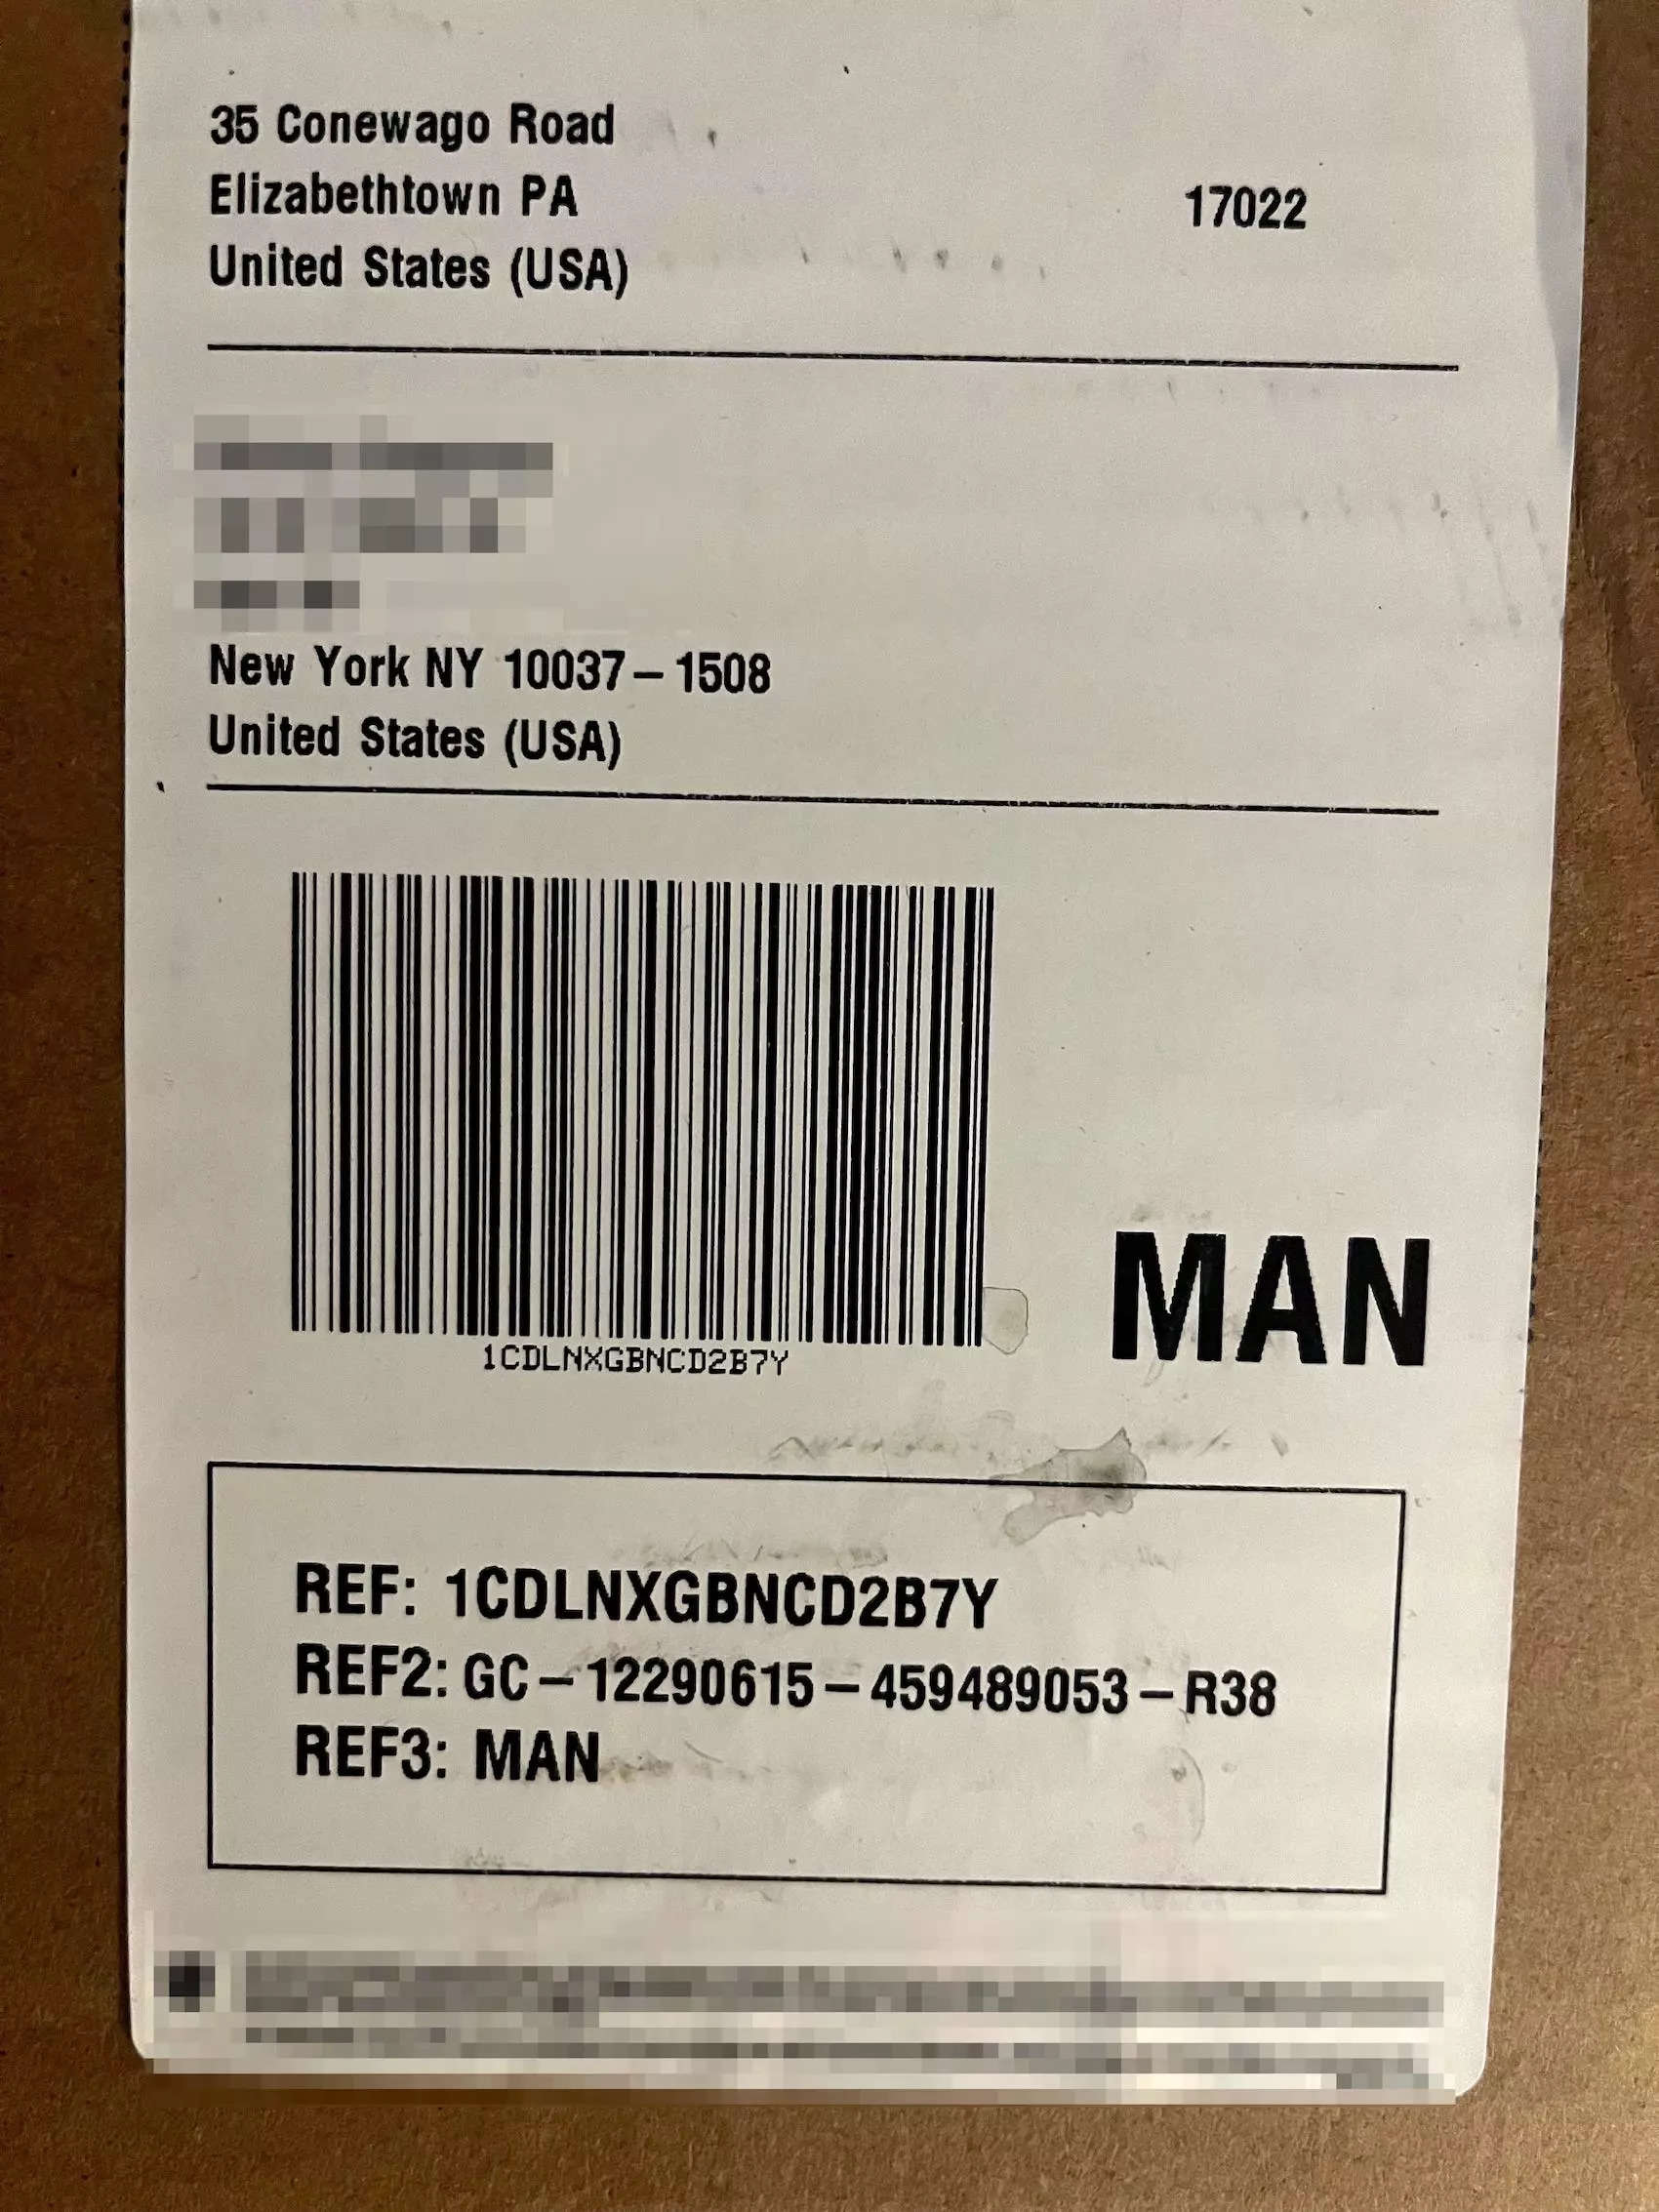 A CDL Logistics package shipping label